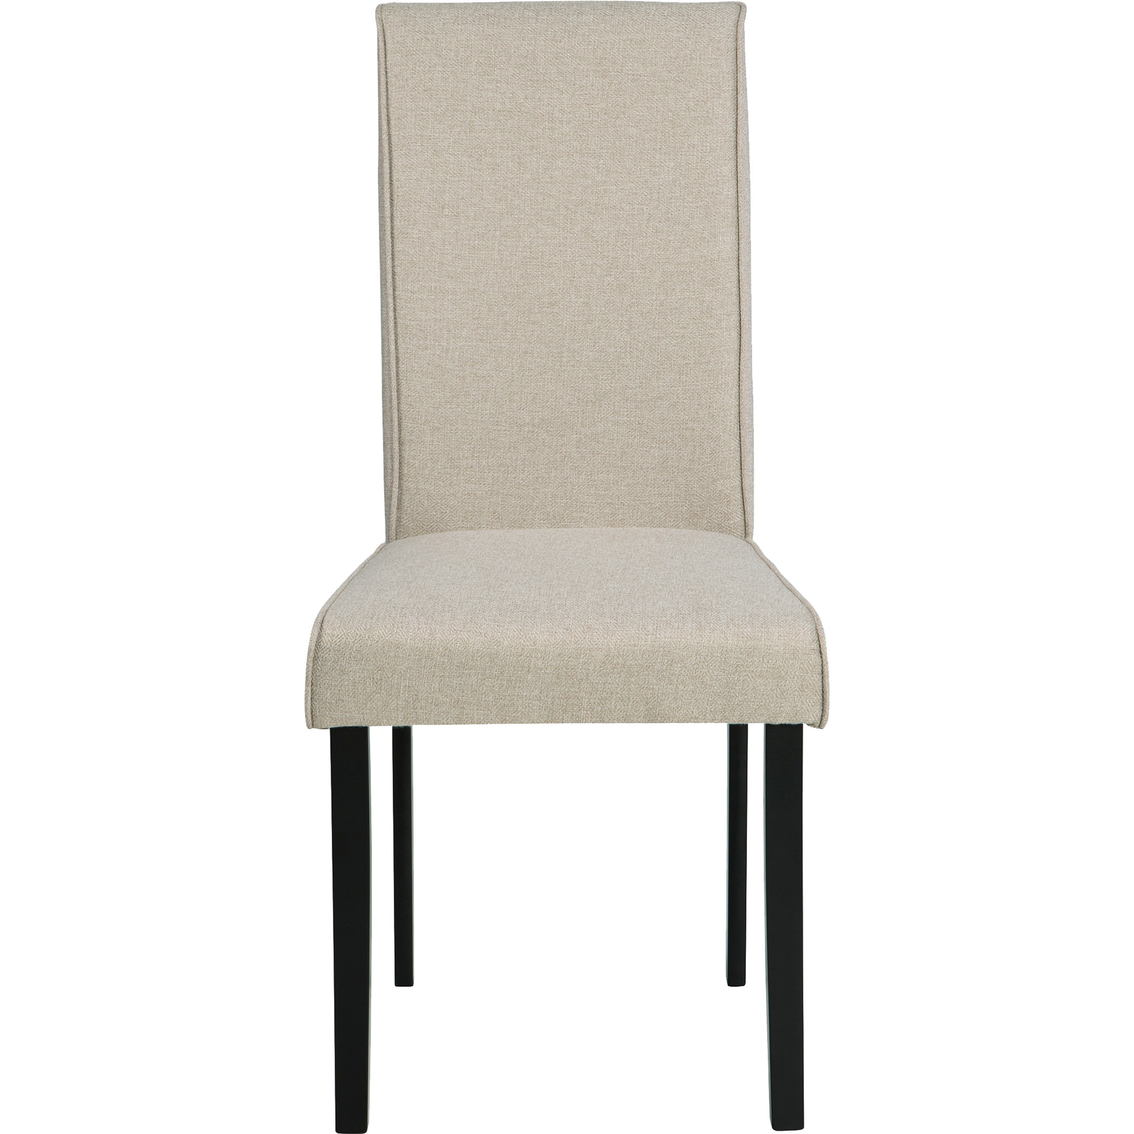 Signature Design by Ashley Kimonte Dining Room Side Chair 2 pk. - Image 2 of 6